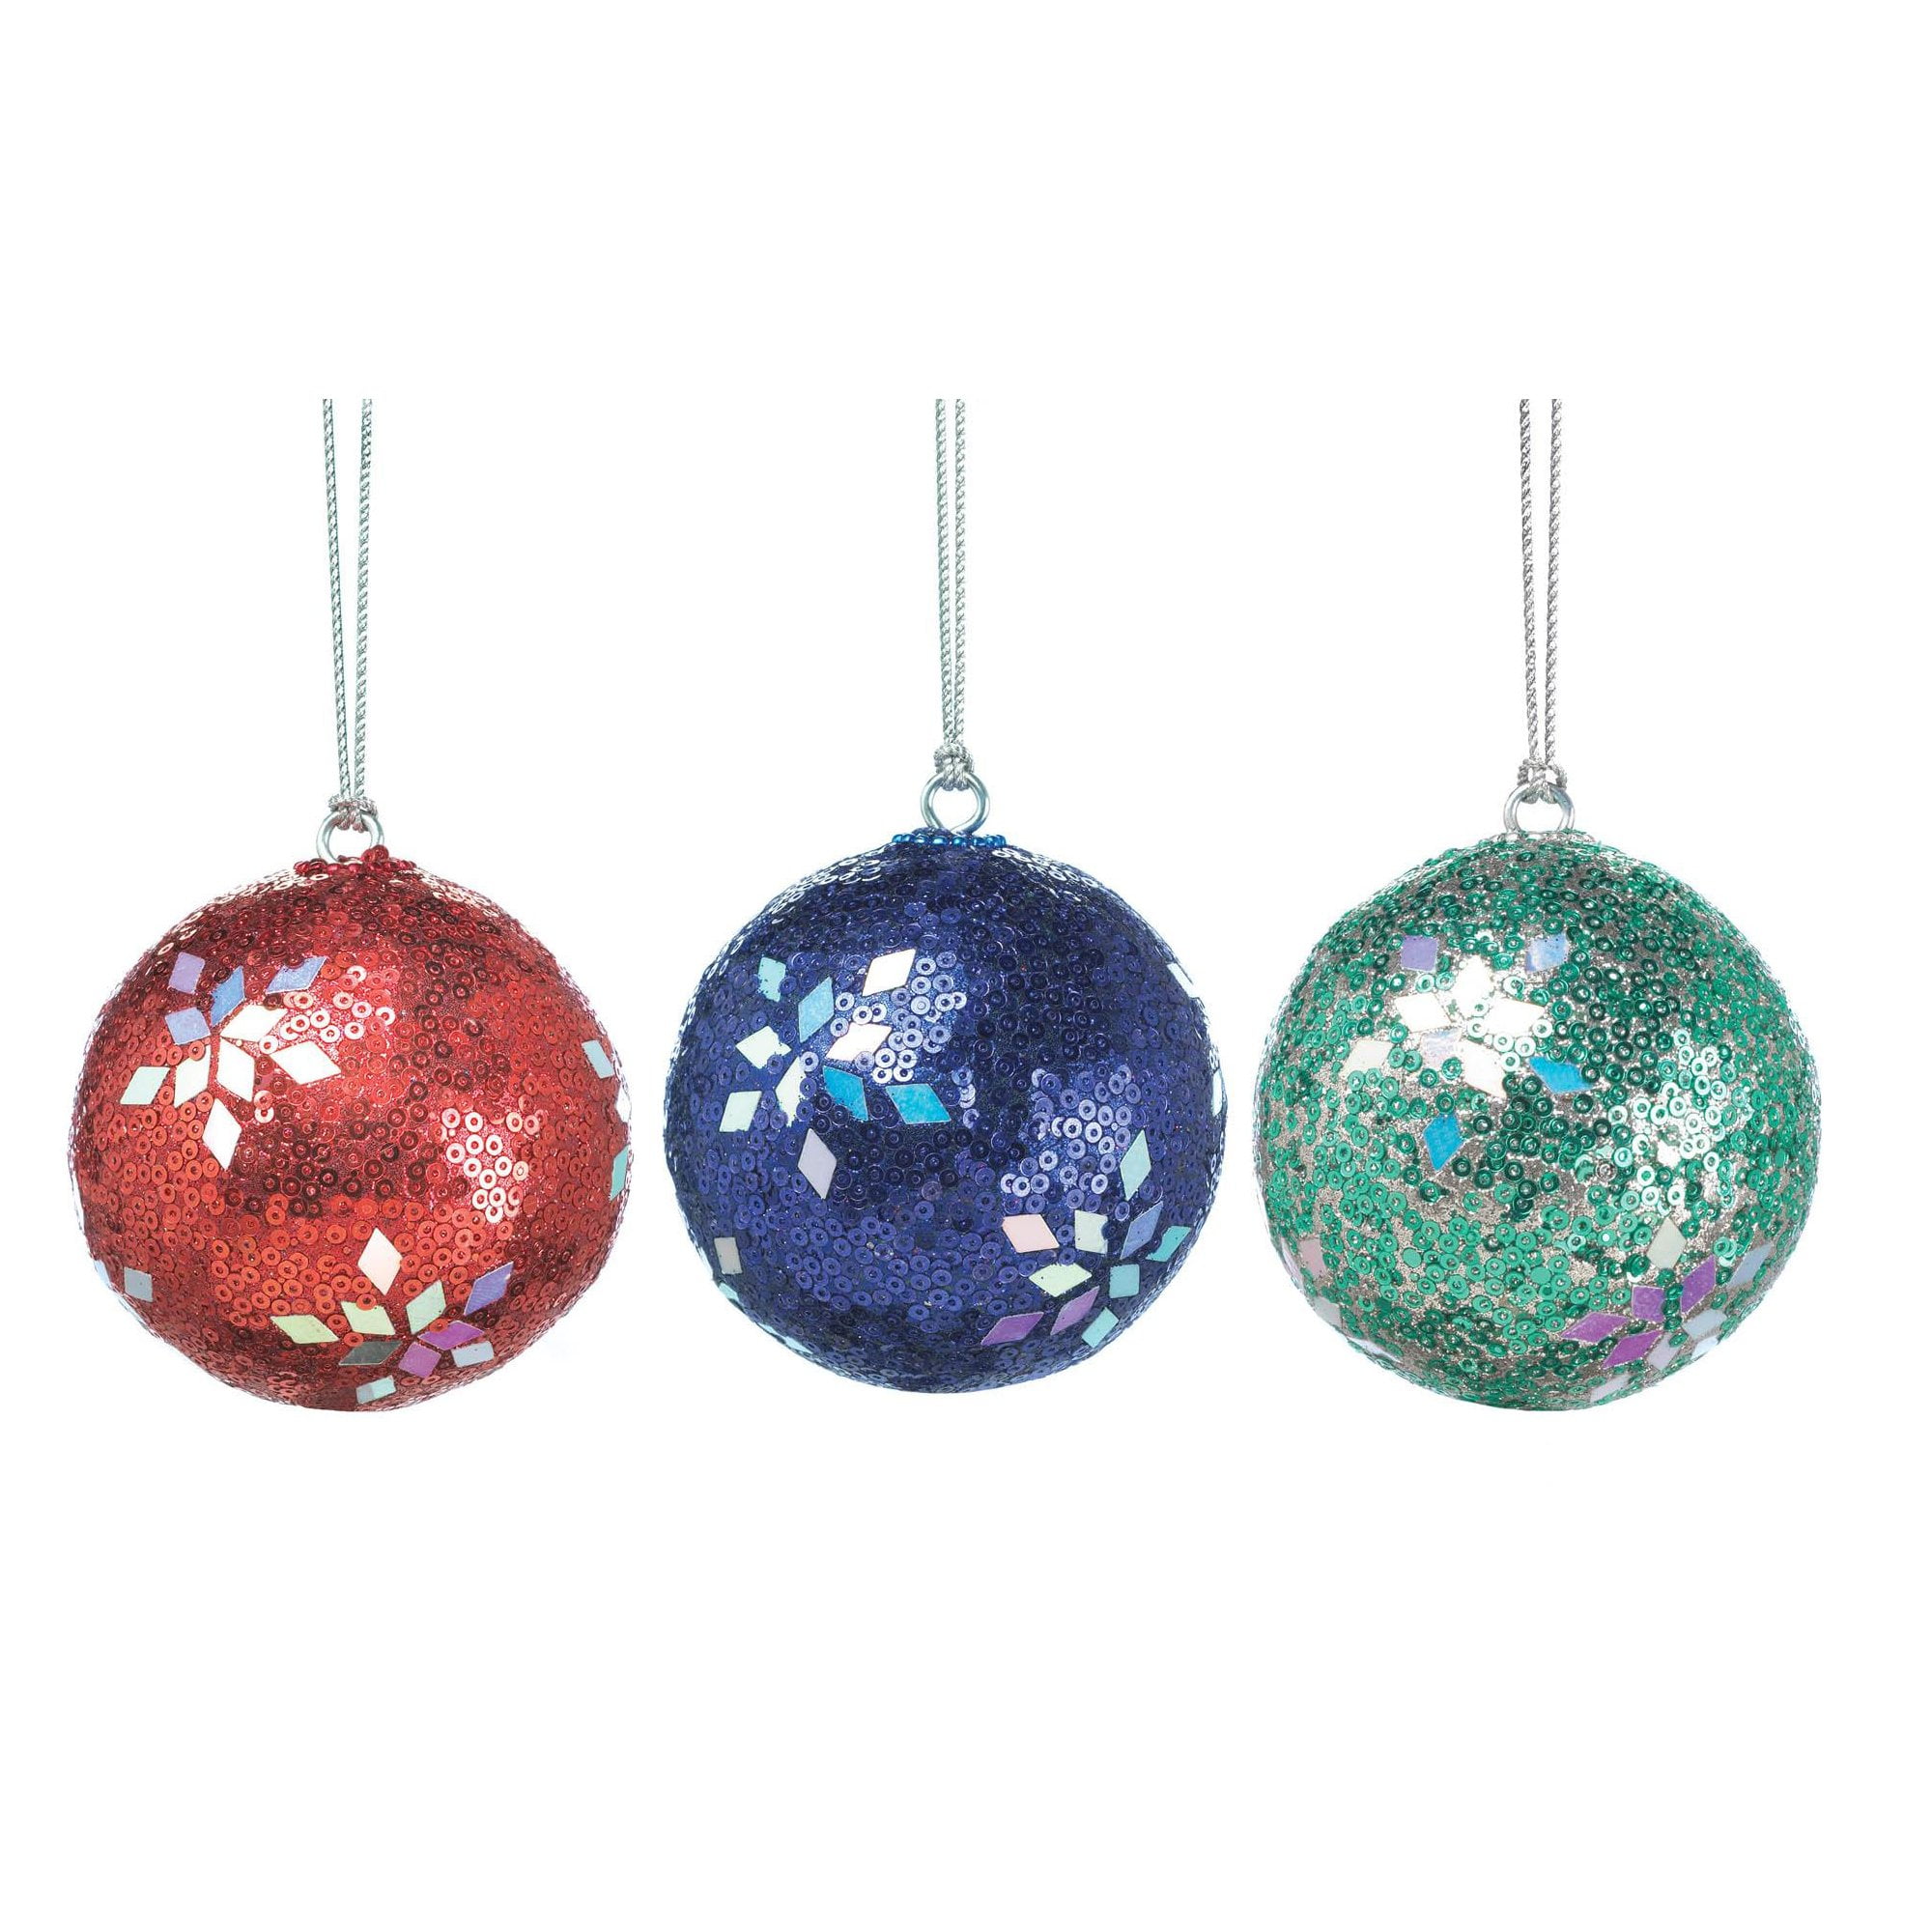 Christmas Tree Ornaments Balls, Hanging Colored Home Decor Ornaments